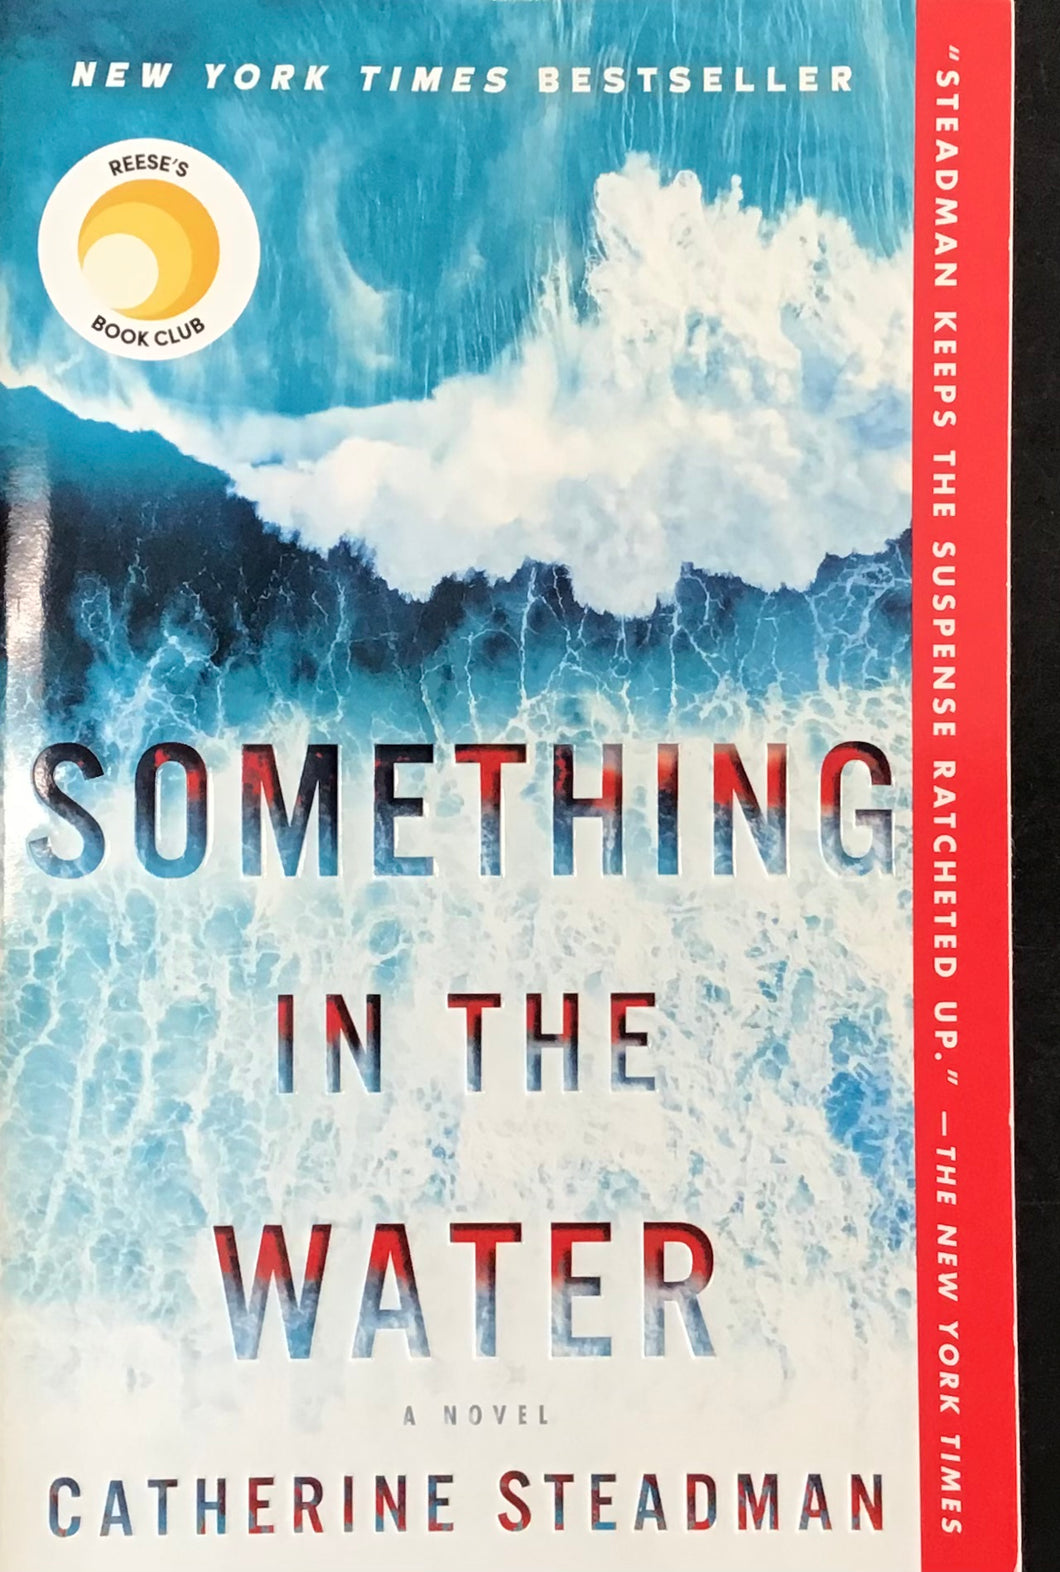 Something in the Water, by Catherine Steadman